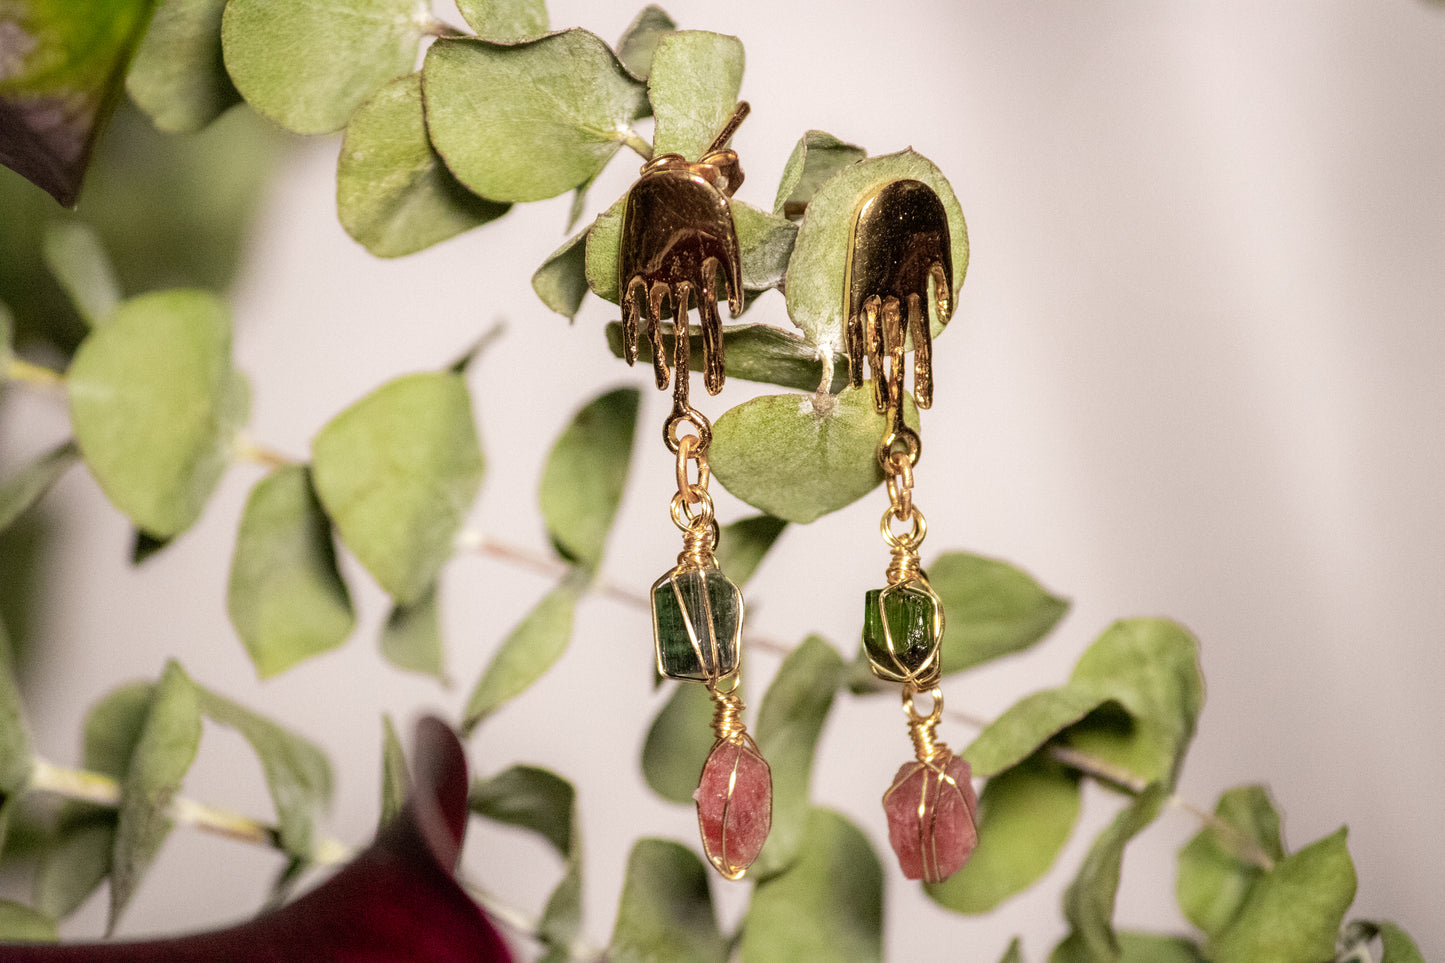 Kabil. Earrings with pink and green tourmaline